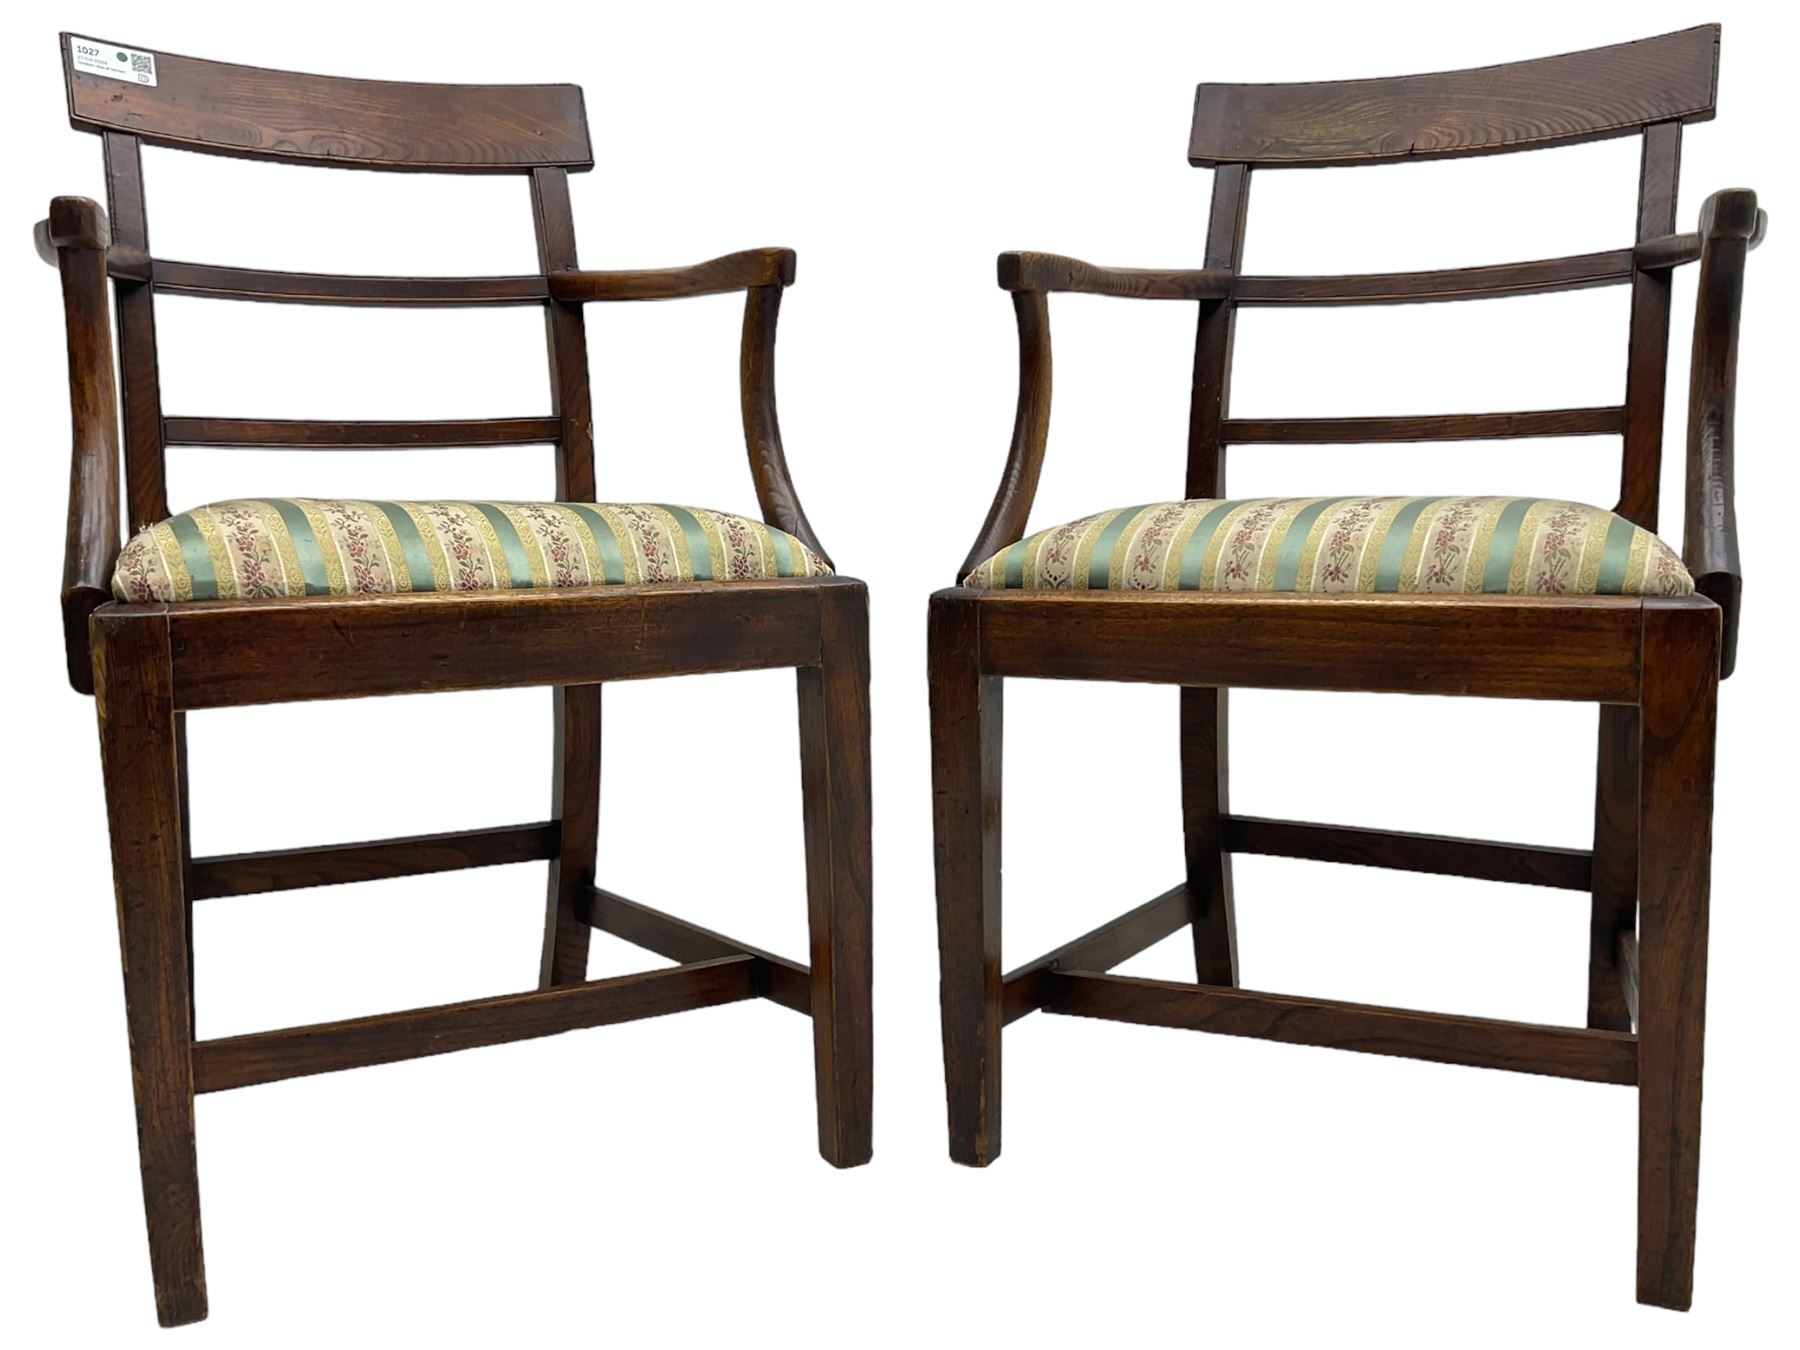 Pair of 19th century elm elbow chairs